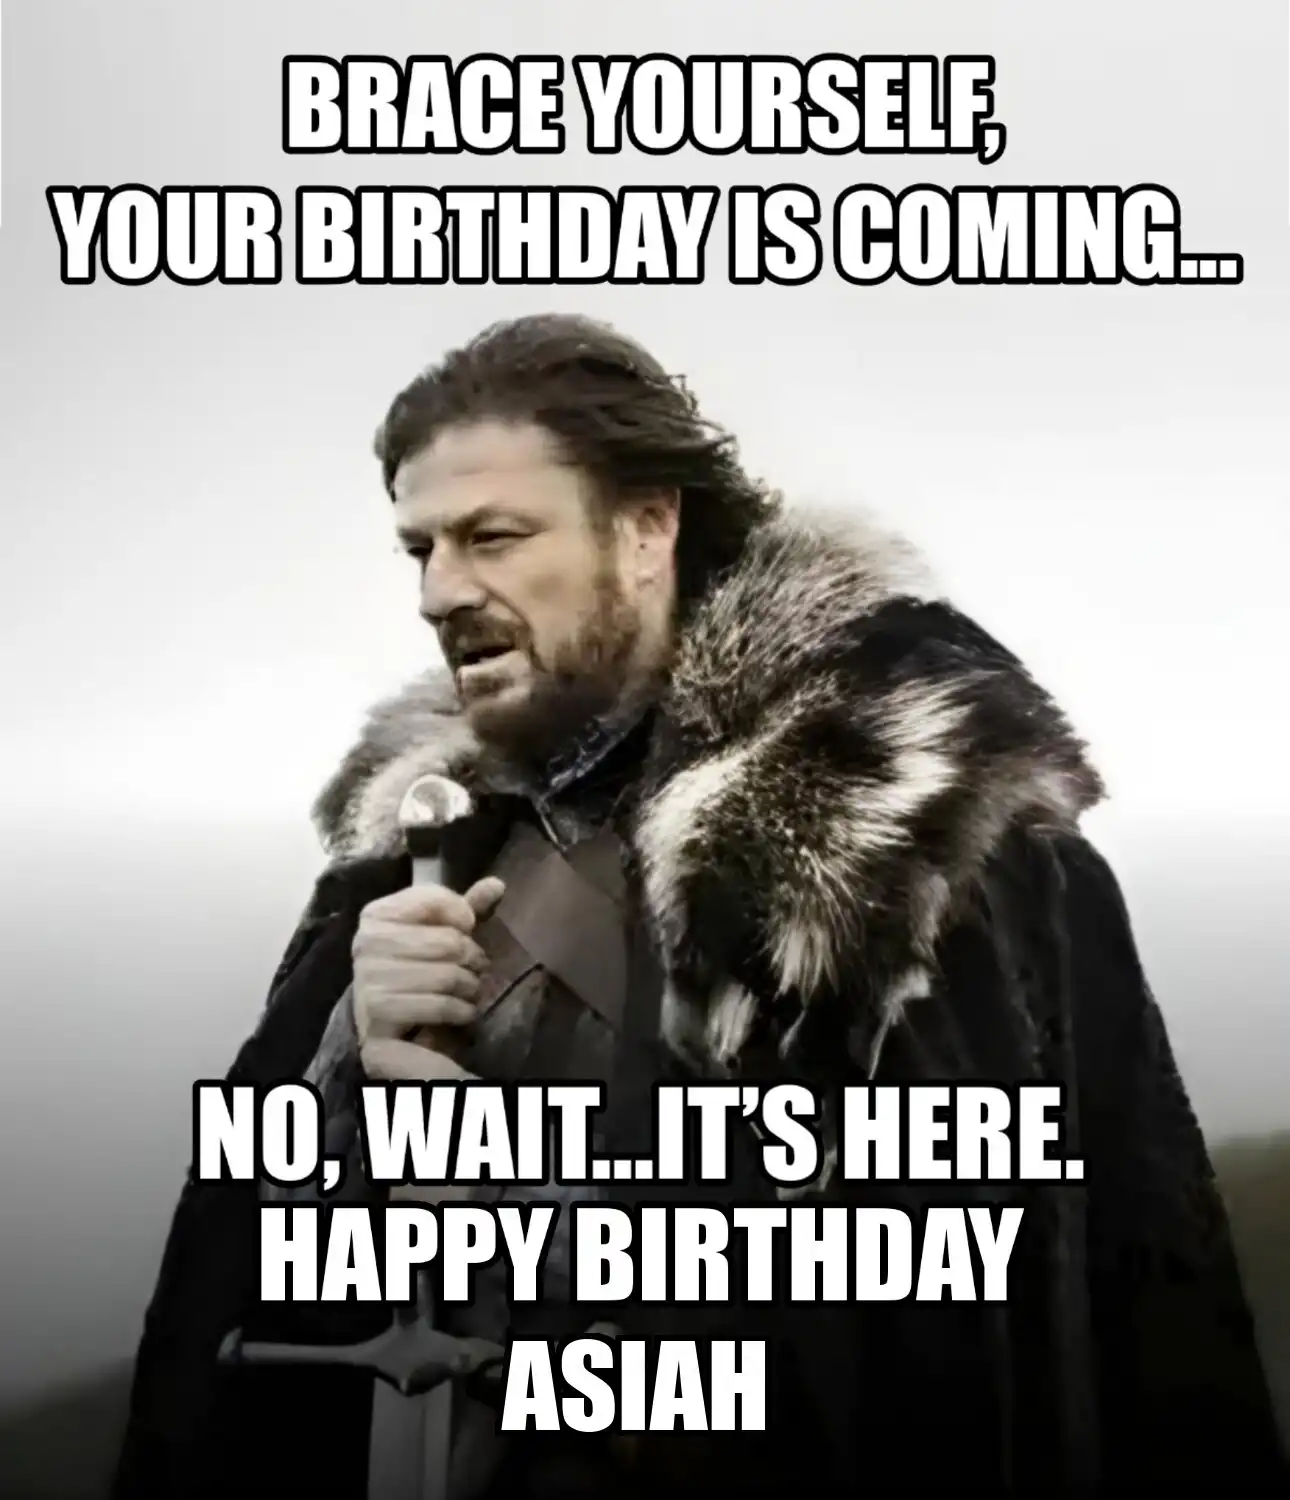 Happy Birthday Asiah Brace Yourself Your Birthday Is Coming Meme